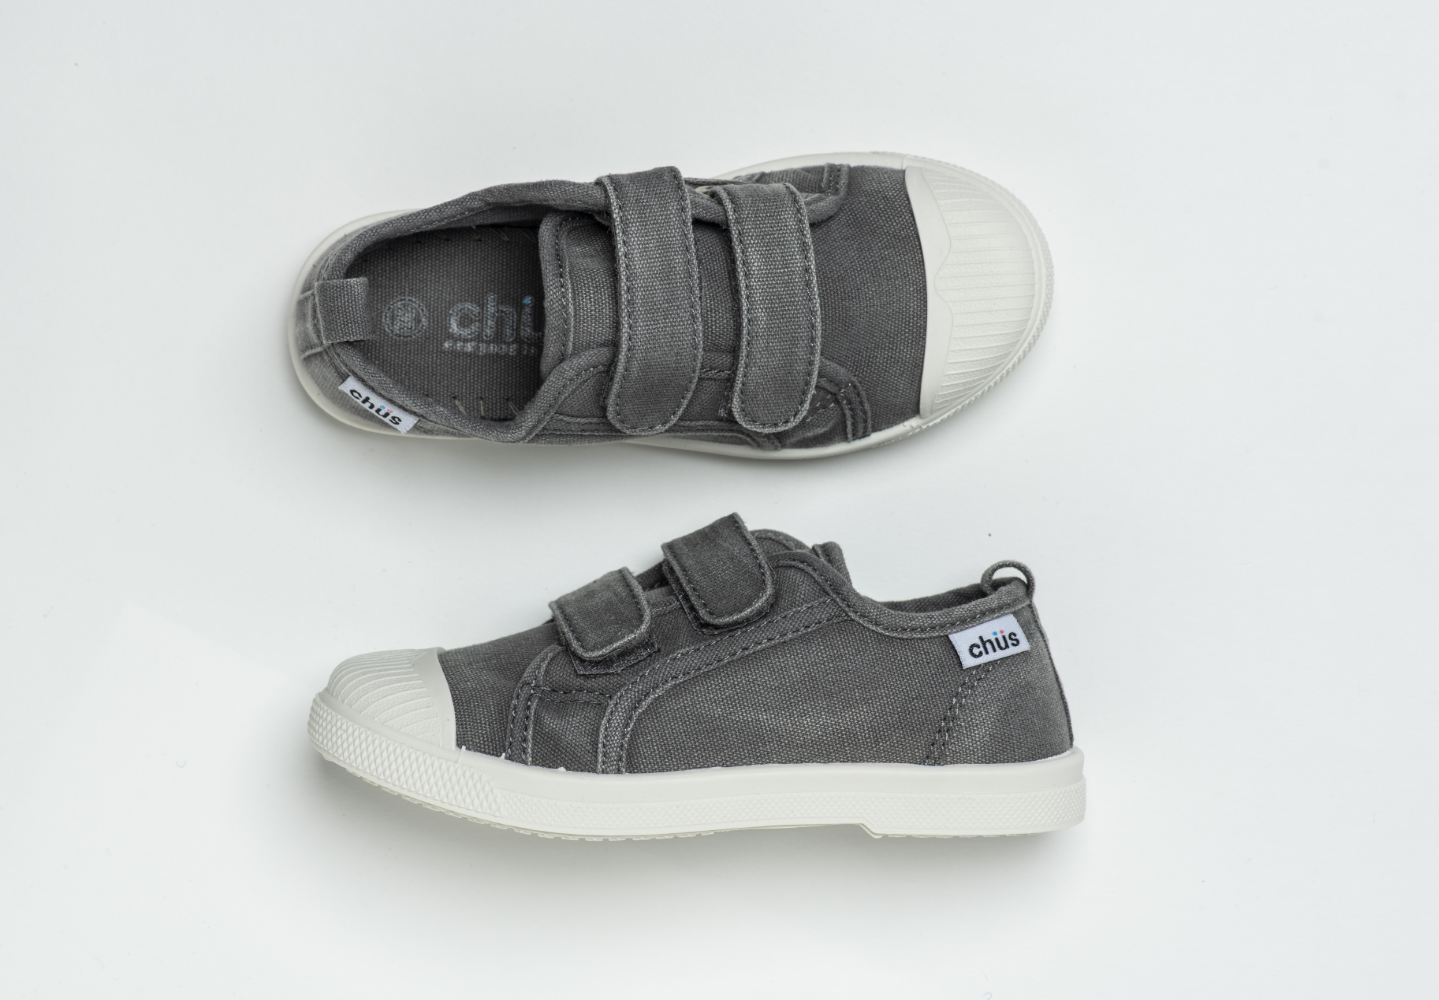 Distressed grey canvas sneakers with double velcro straps. Chus Shoes. Top view.